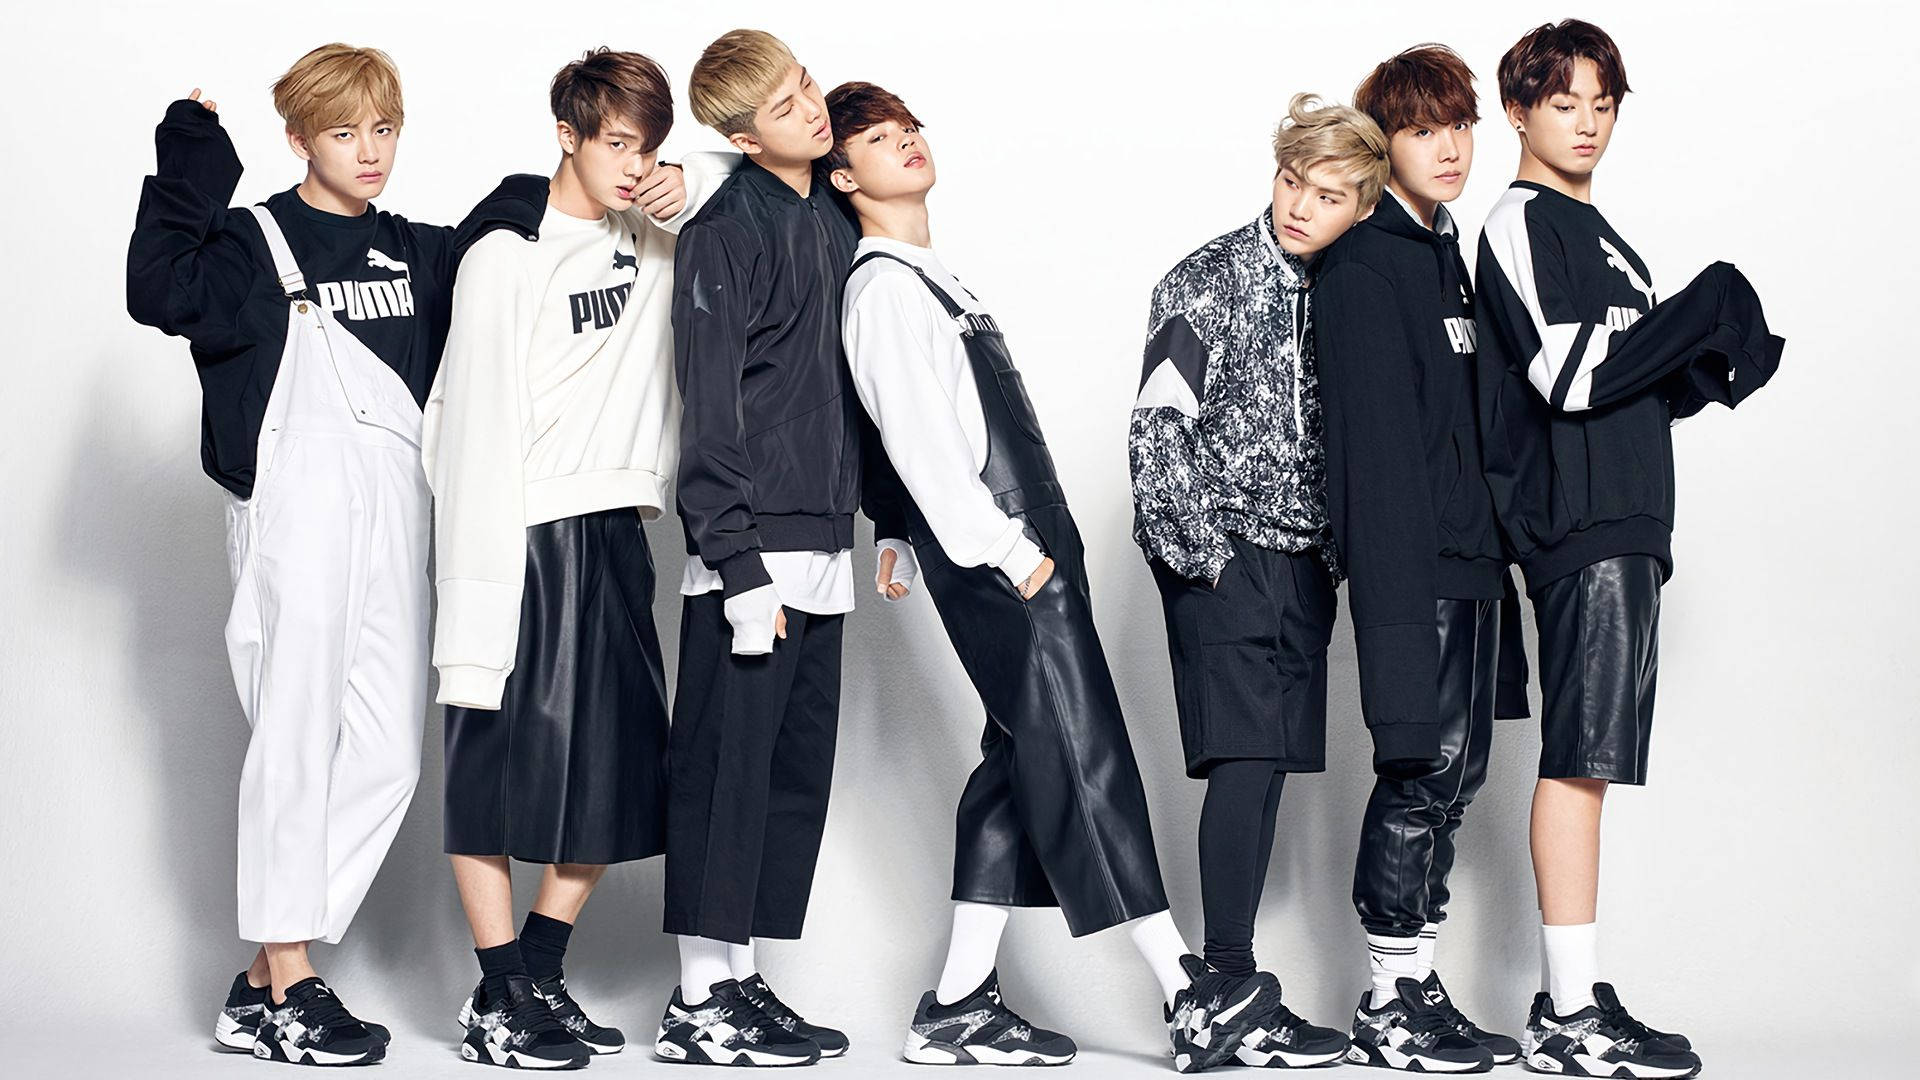 Download Bts Group Aesthetic In Puma Clothing Wallpaper |